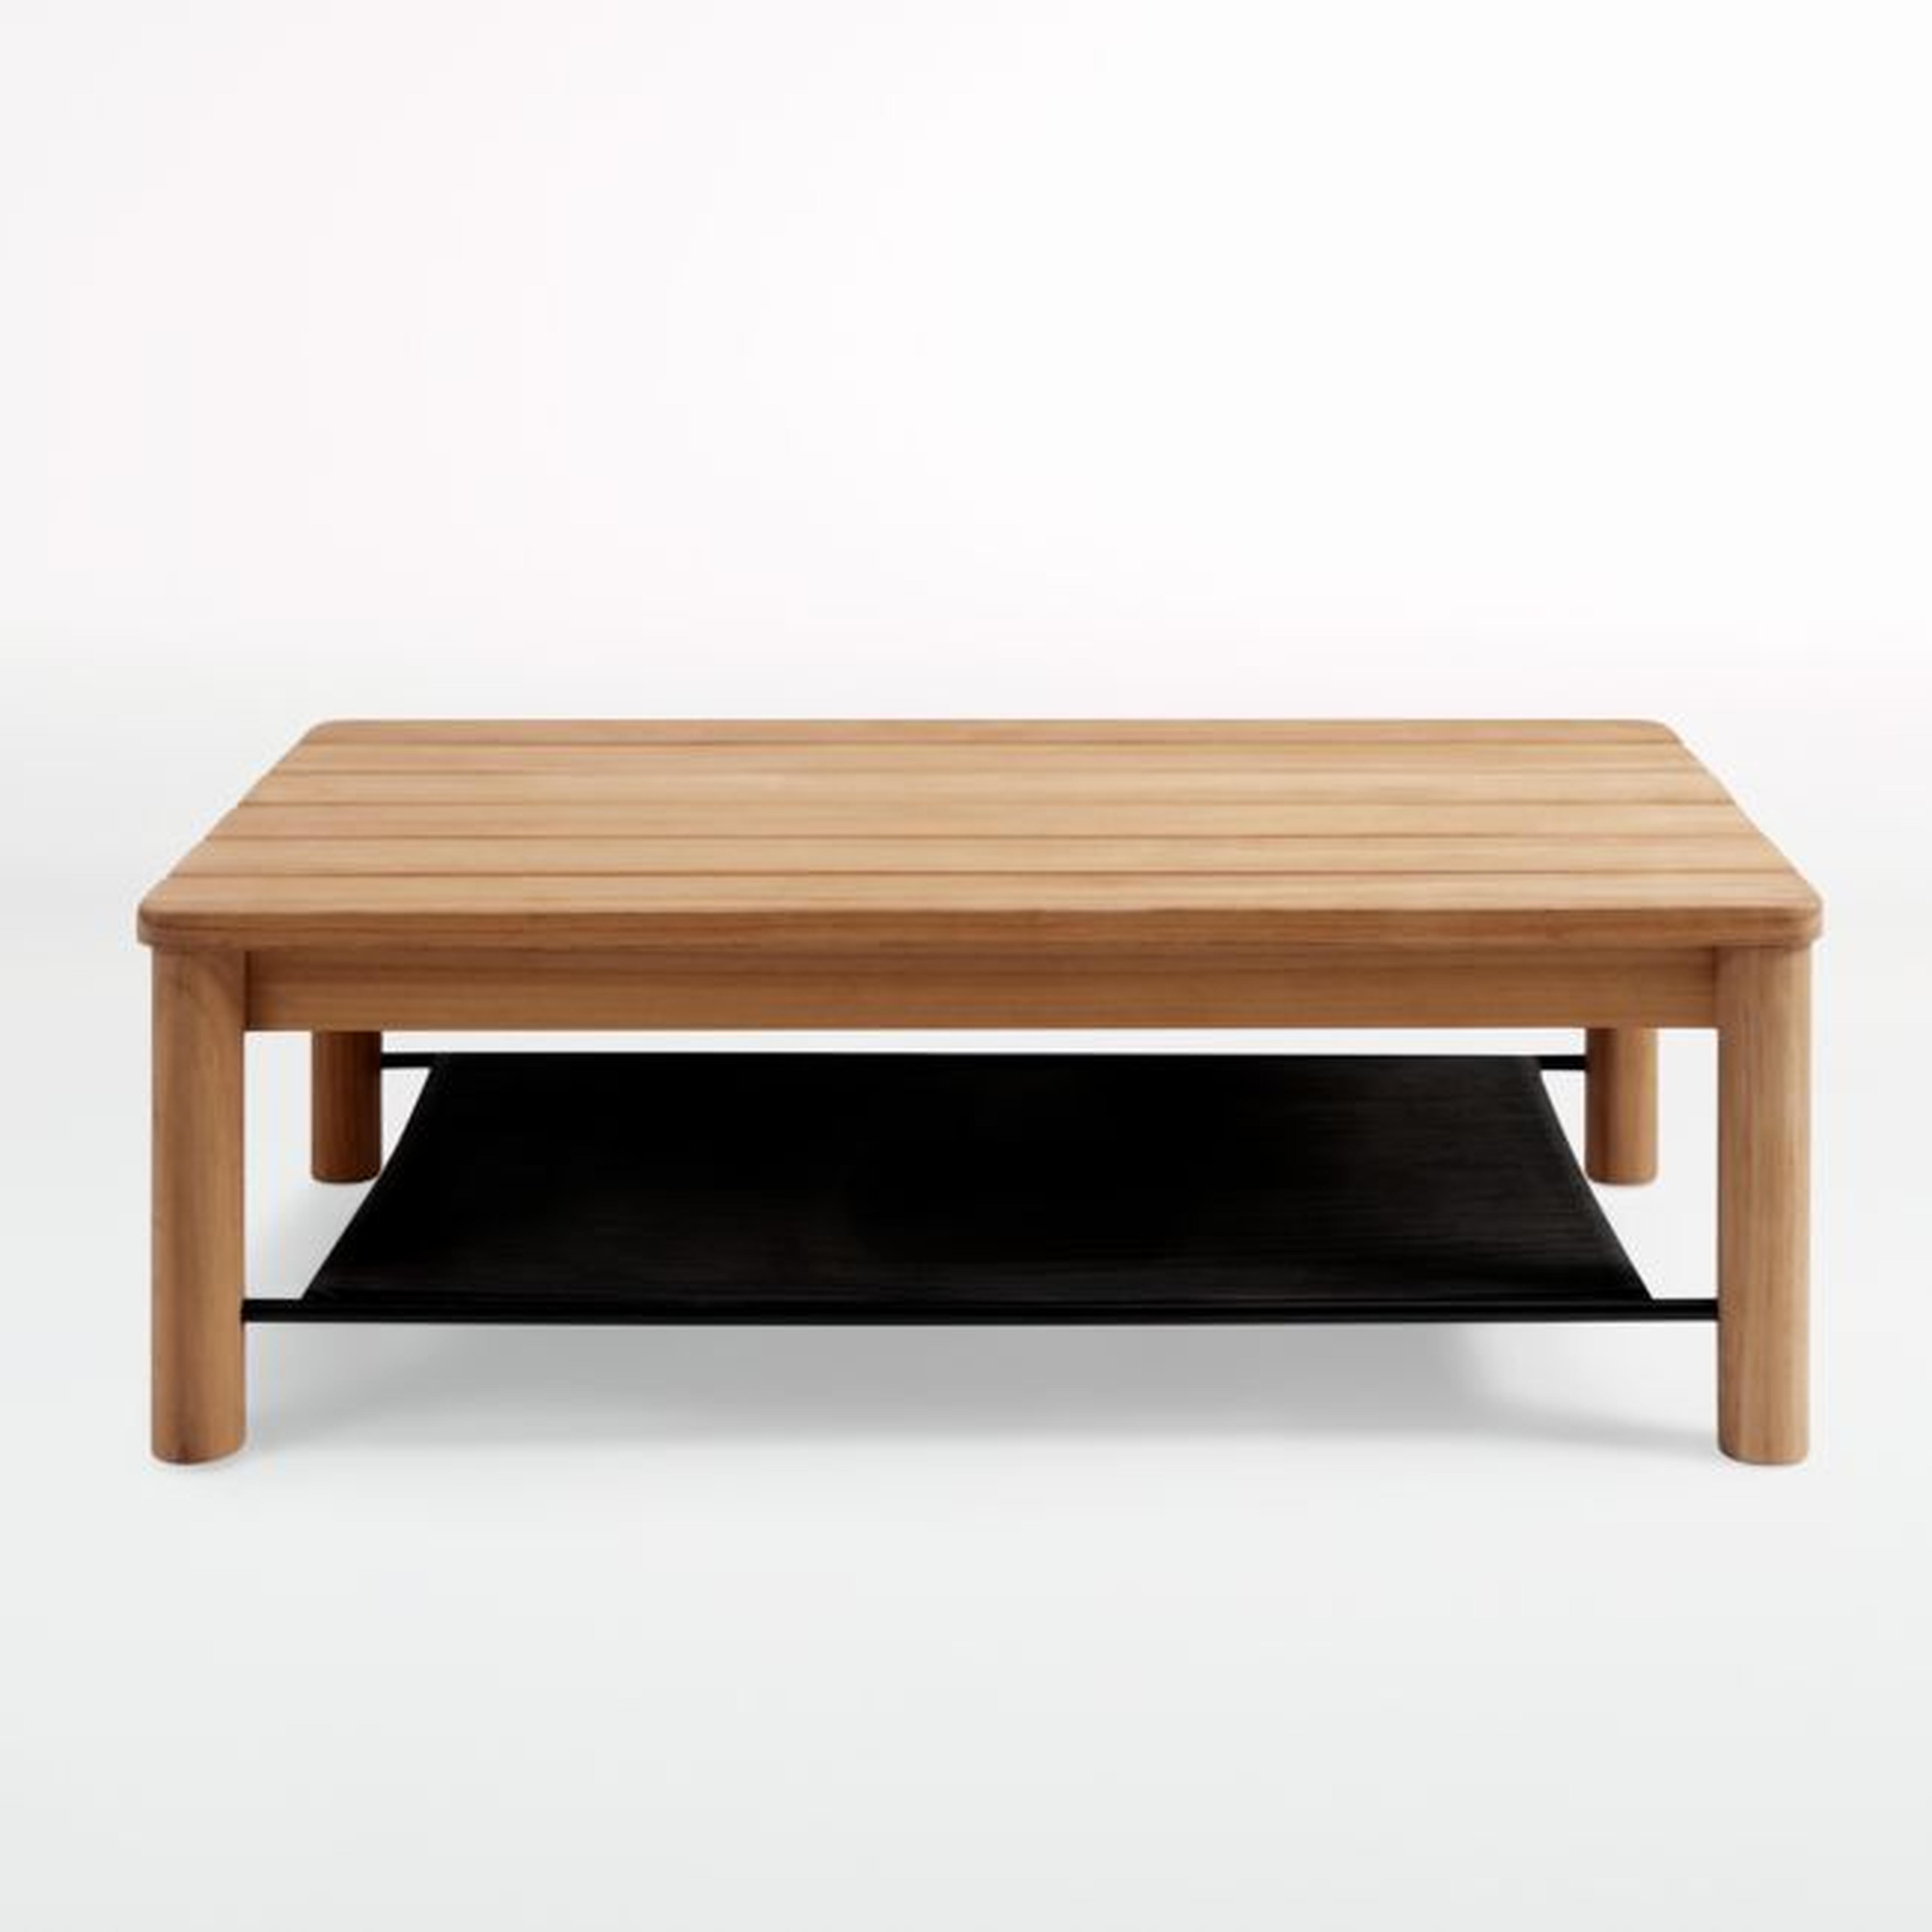 Neighbor ™ Haven Outdoor Coffee Table - Crate and Barrel